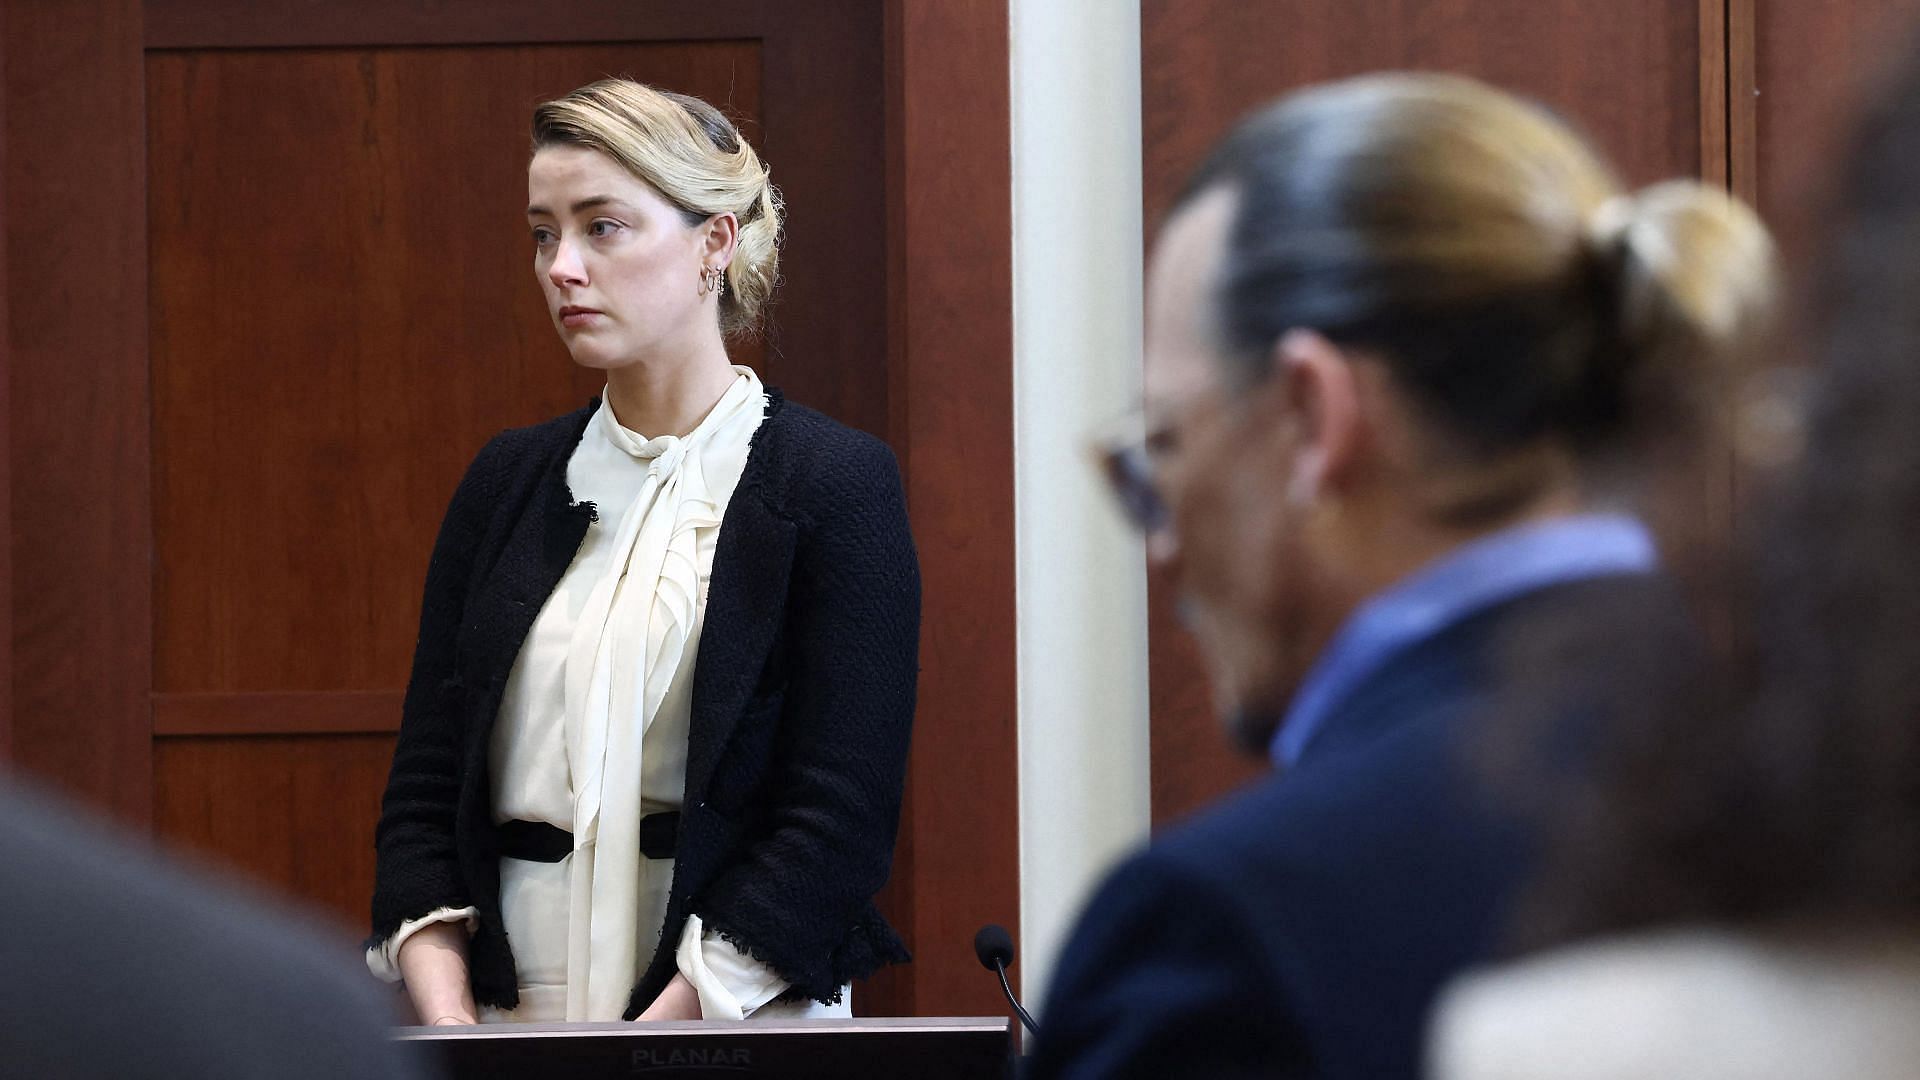 Amber Heard and Johnny Depp in the court (Jim Lo Scalzo/AFP/Getty Images)